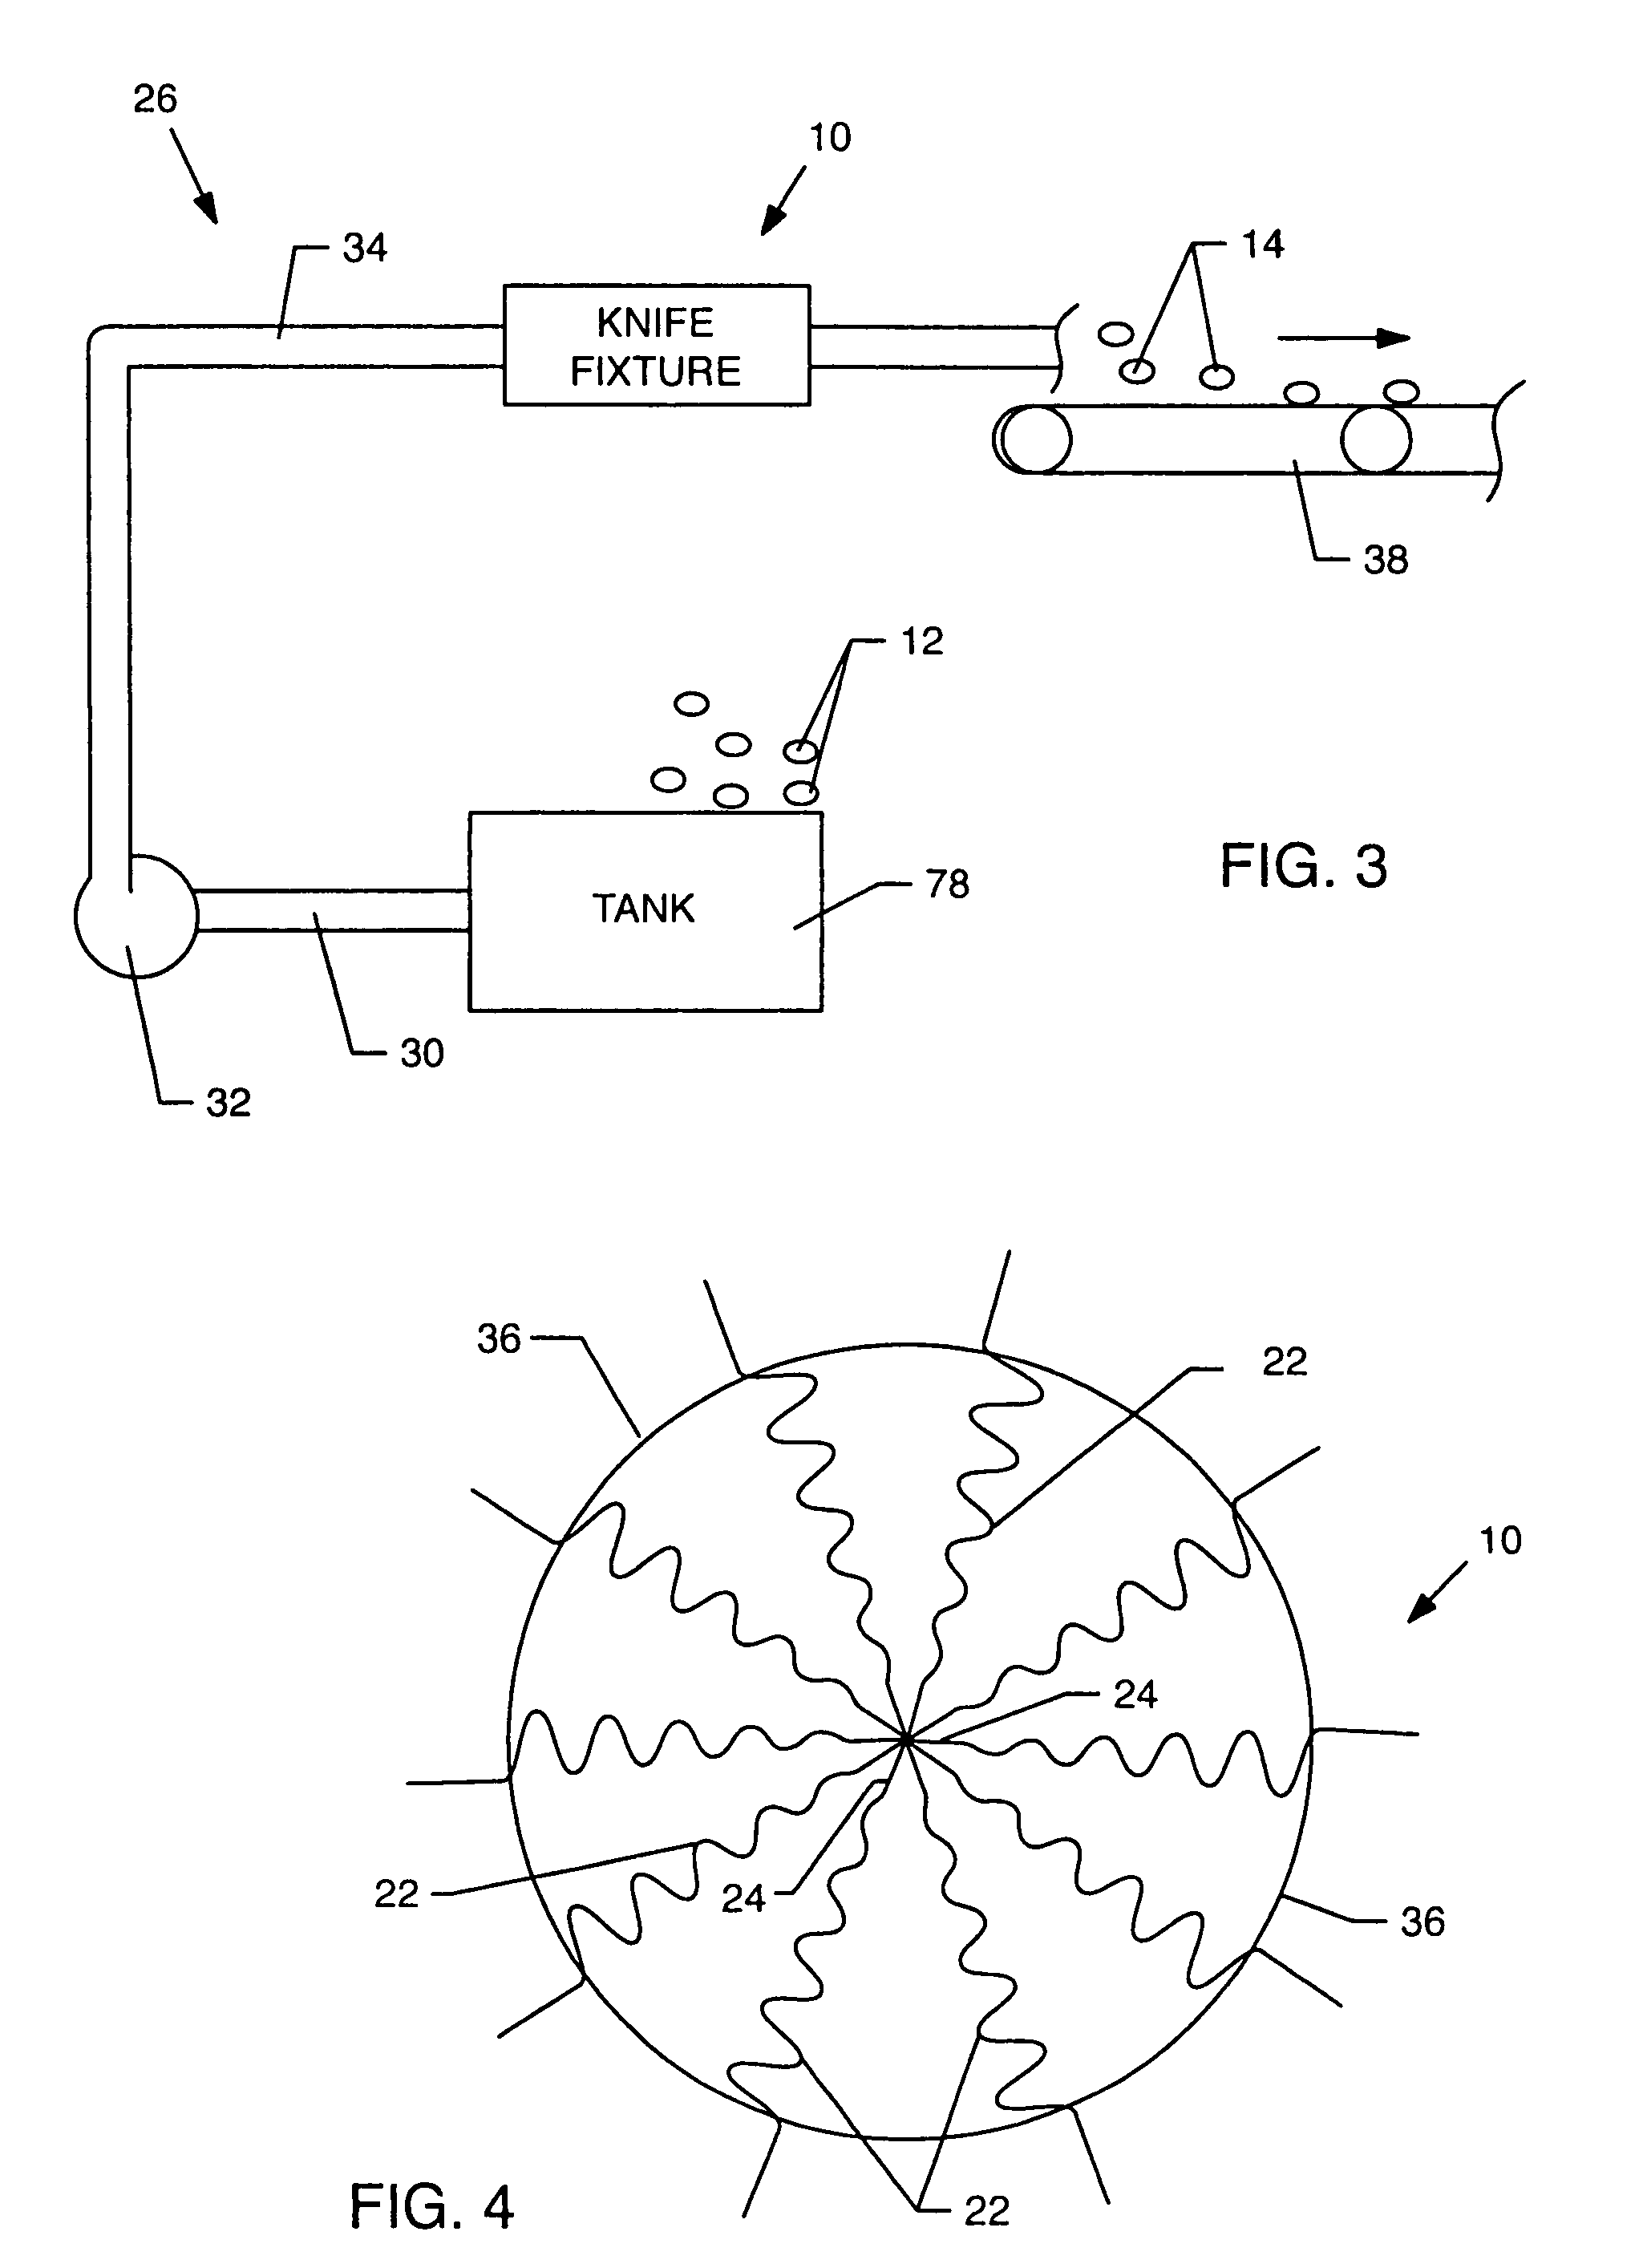 Corrugated knife fixture with variable pitch and amplitude